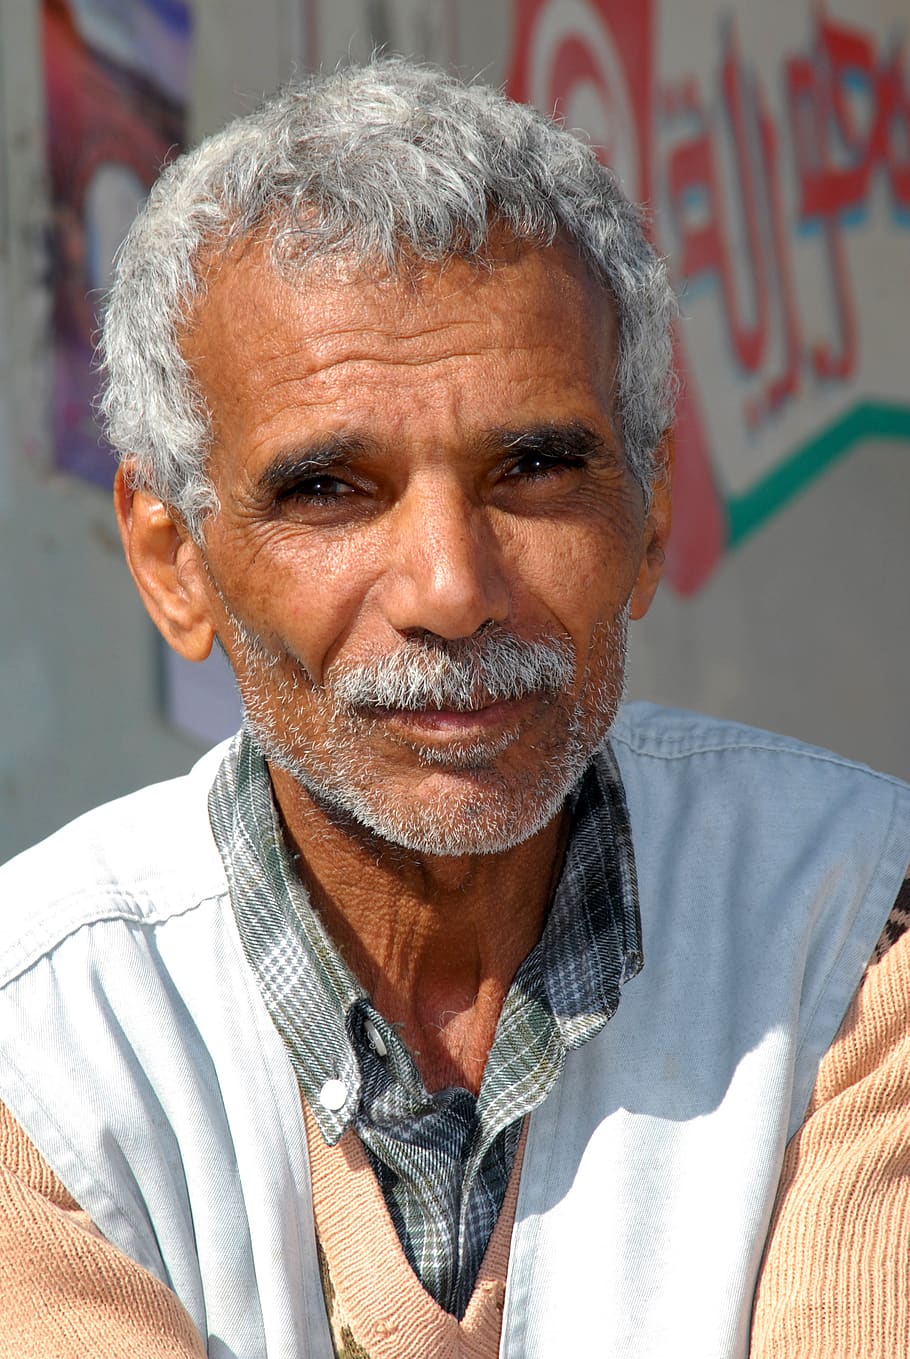 tunisia, man, old, portrait, face, expression, headshot, mature adult, one person, front view